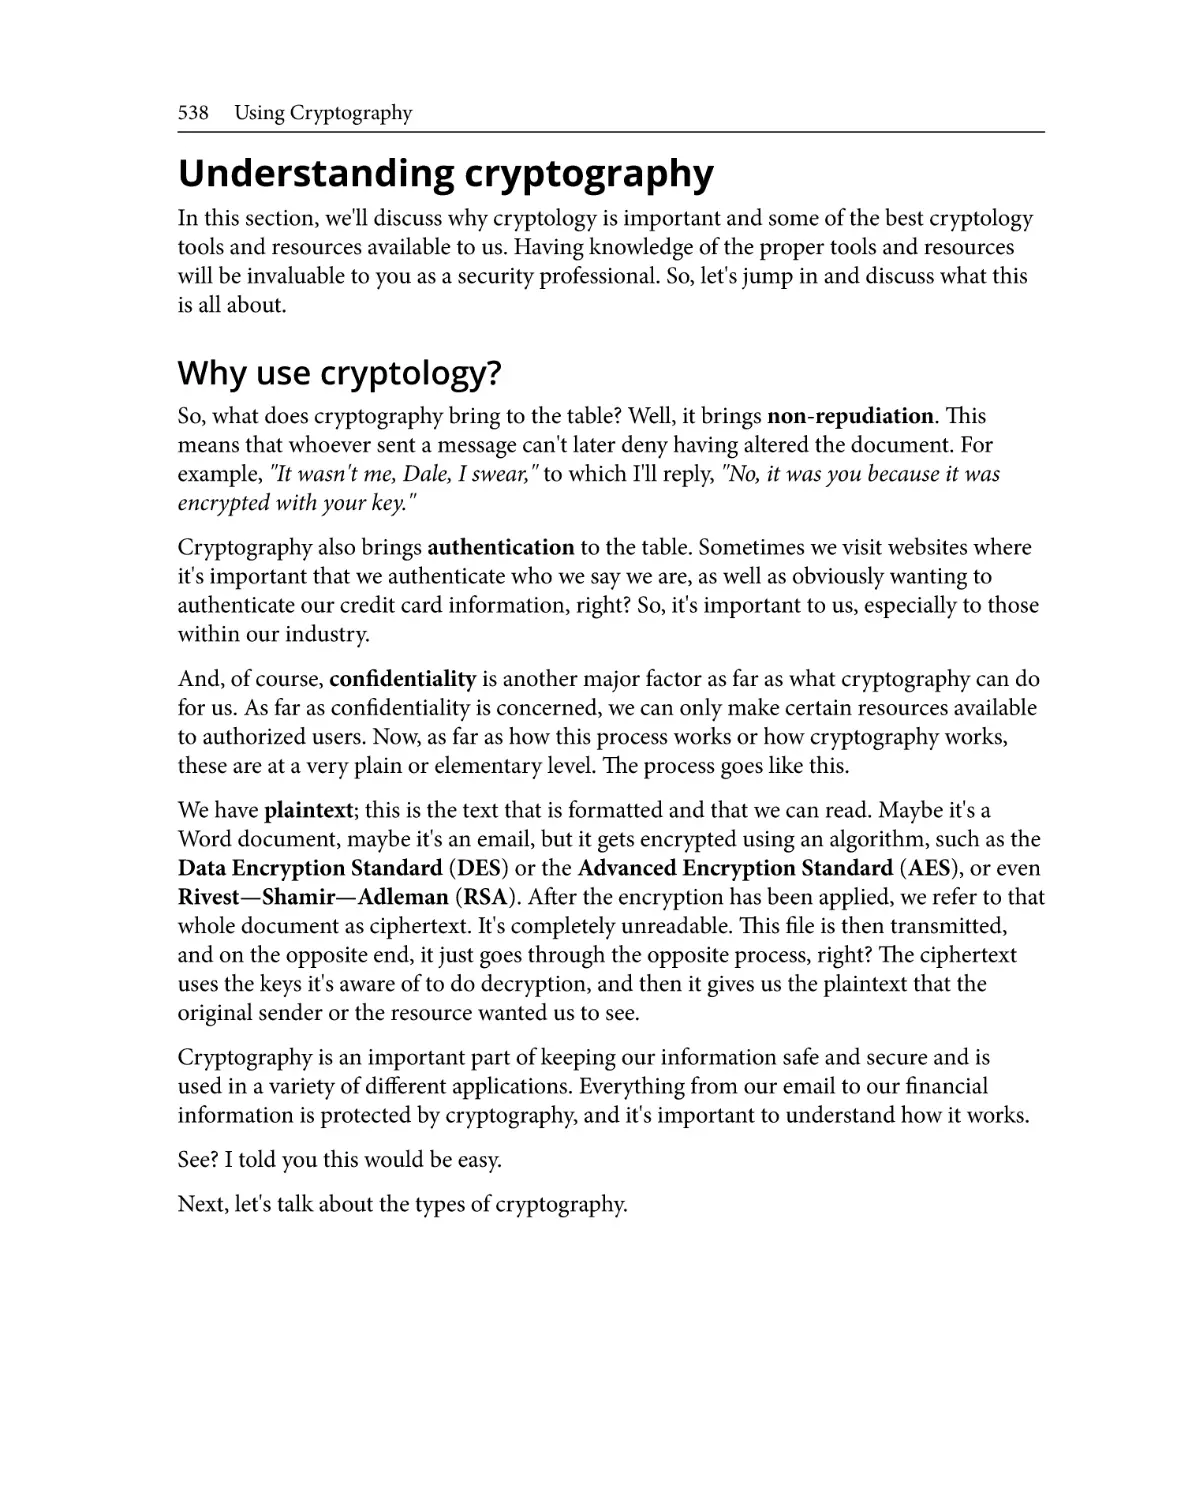 Understanding cryptography
Why use cryptology?